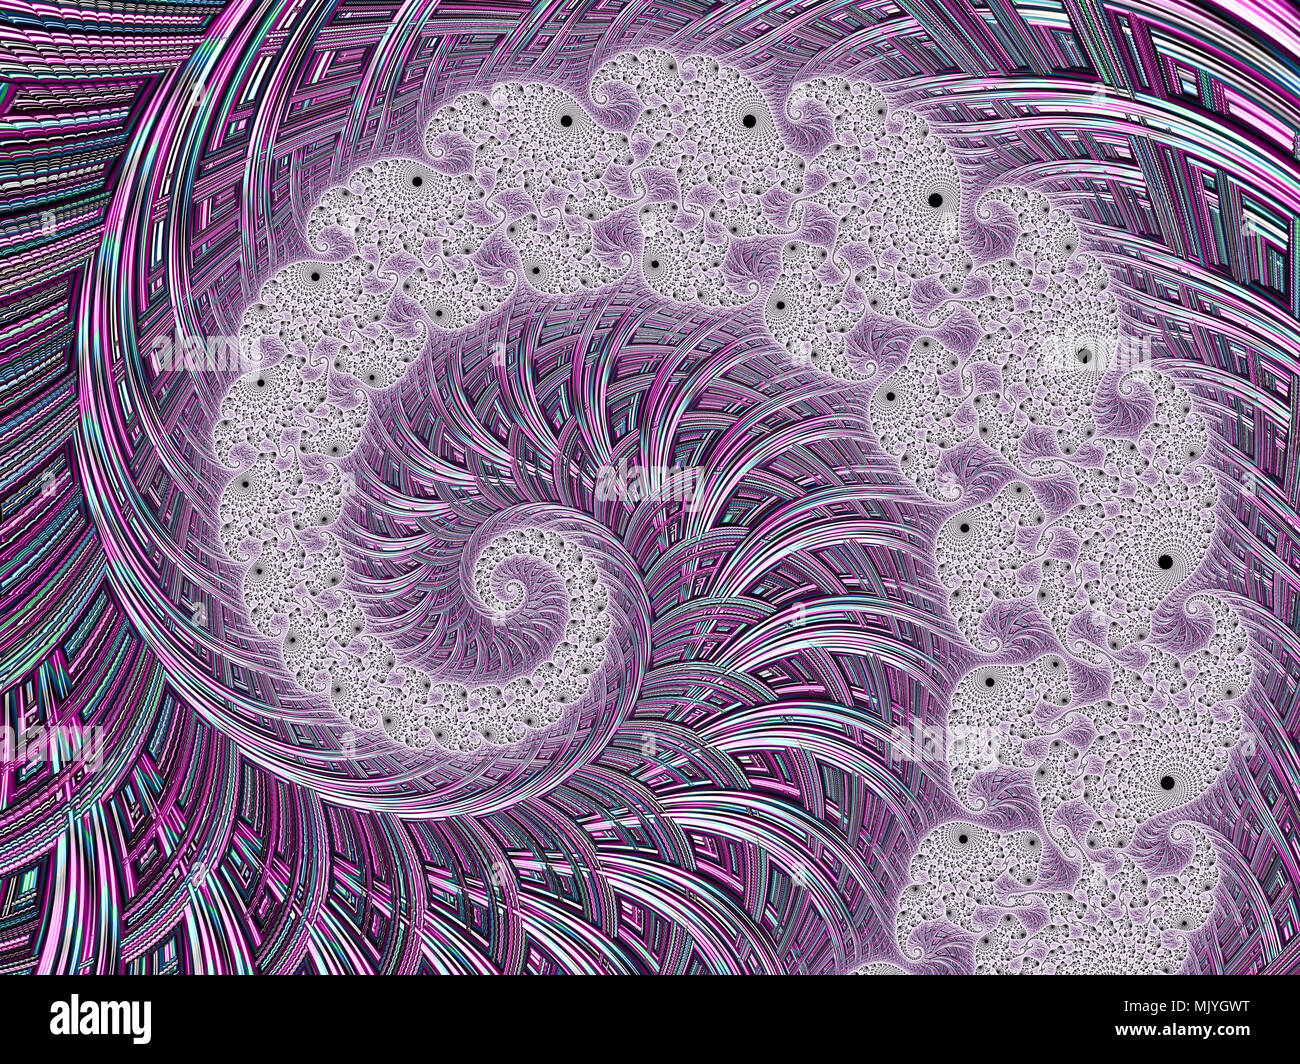 abstract fractal pink pattern with spiral effect. beautiful high-resolution image Stock Photo